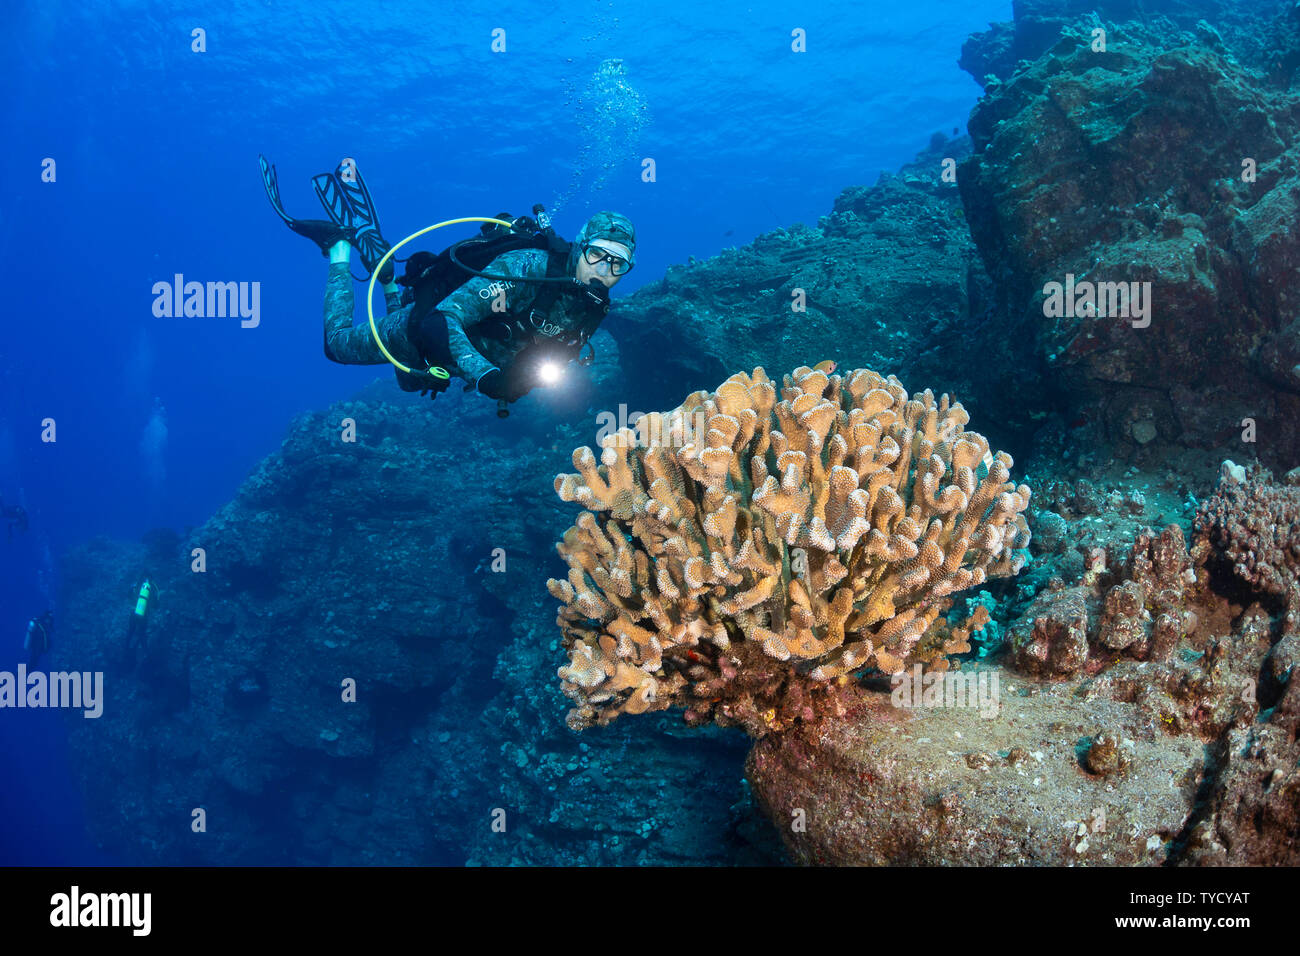 A large stand of antler coral, Pocillopora eydouxi, and divers (MR) on a wall dive off Kaumalapau Harbor, Lanai, Hawaii. Stock Photo